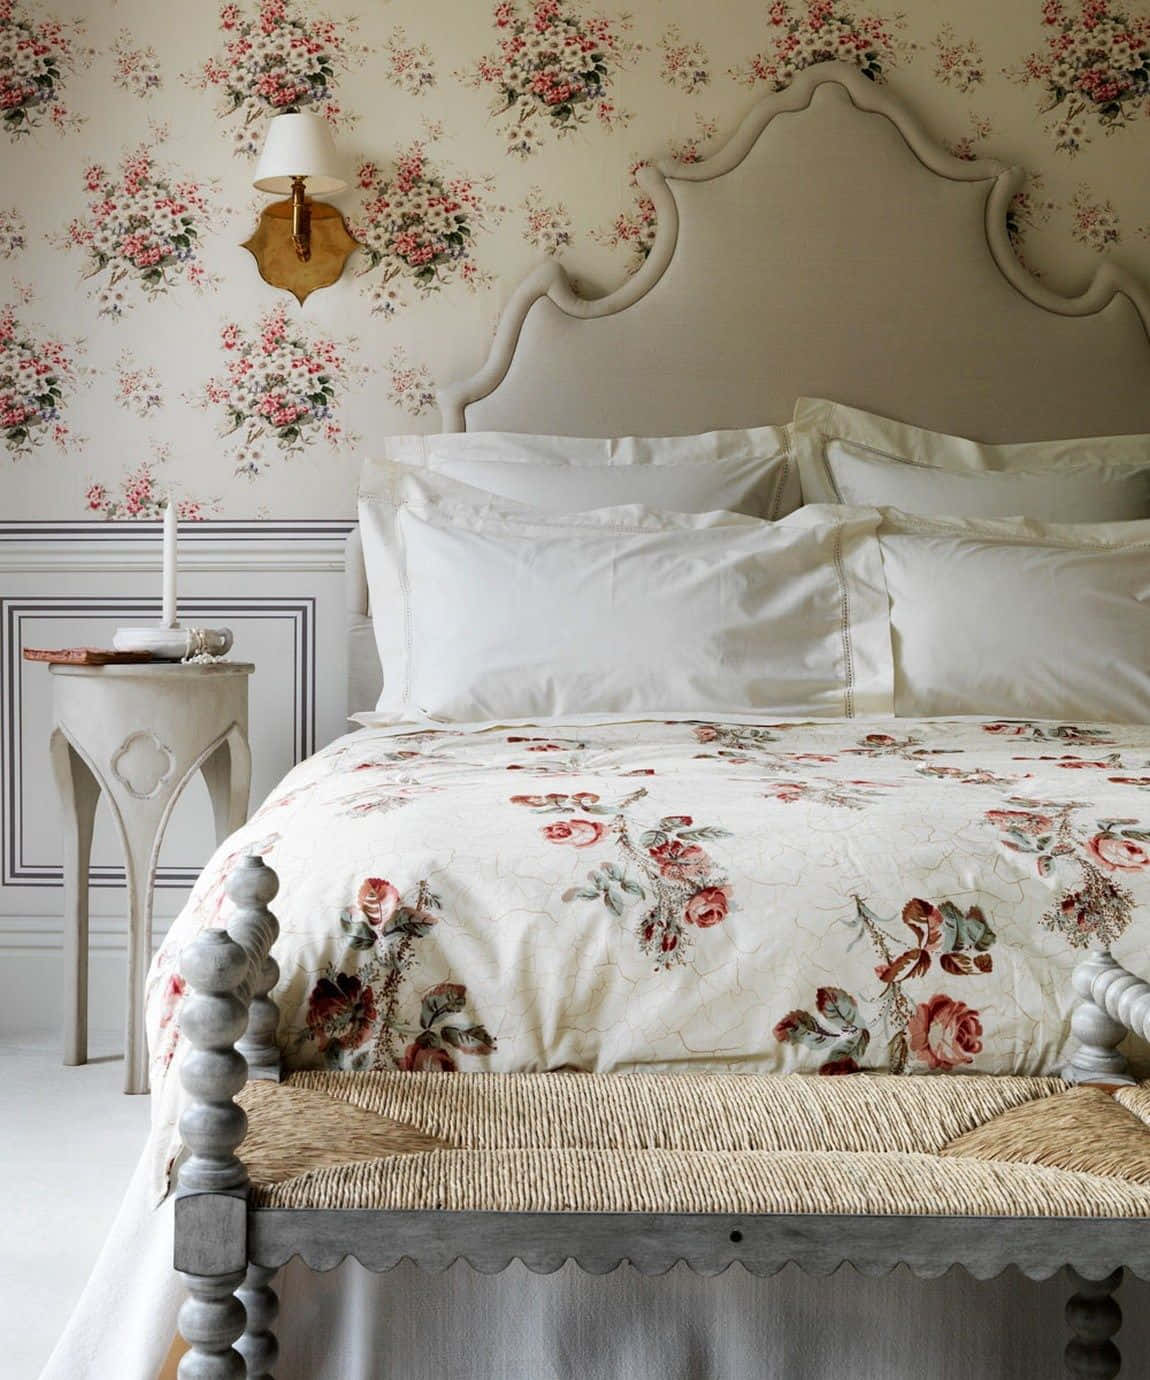 Floral Bed Linen And Wall Background